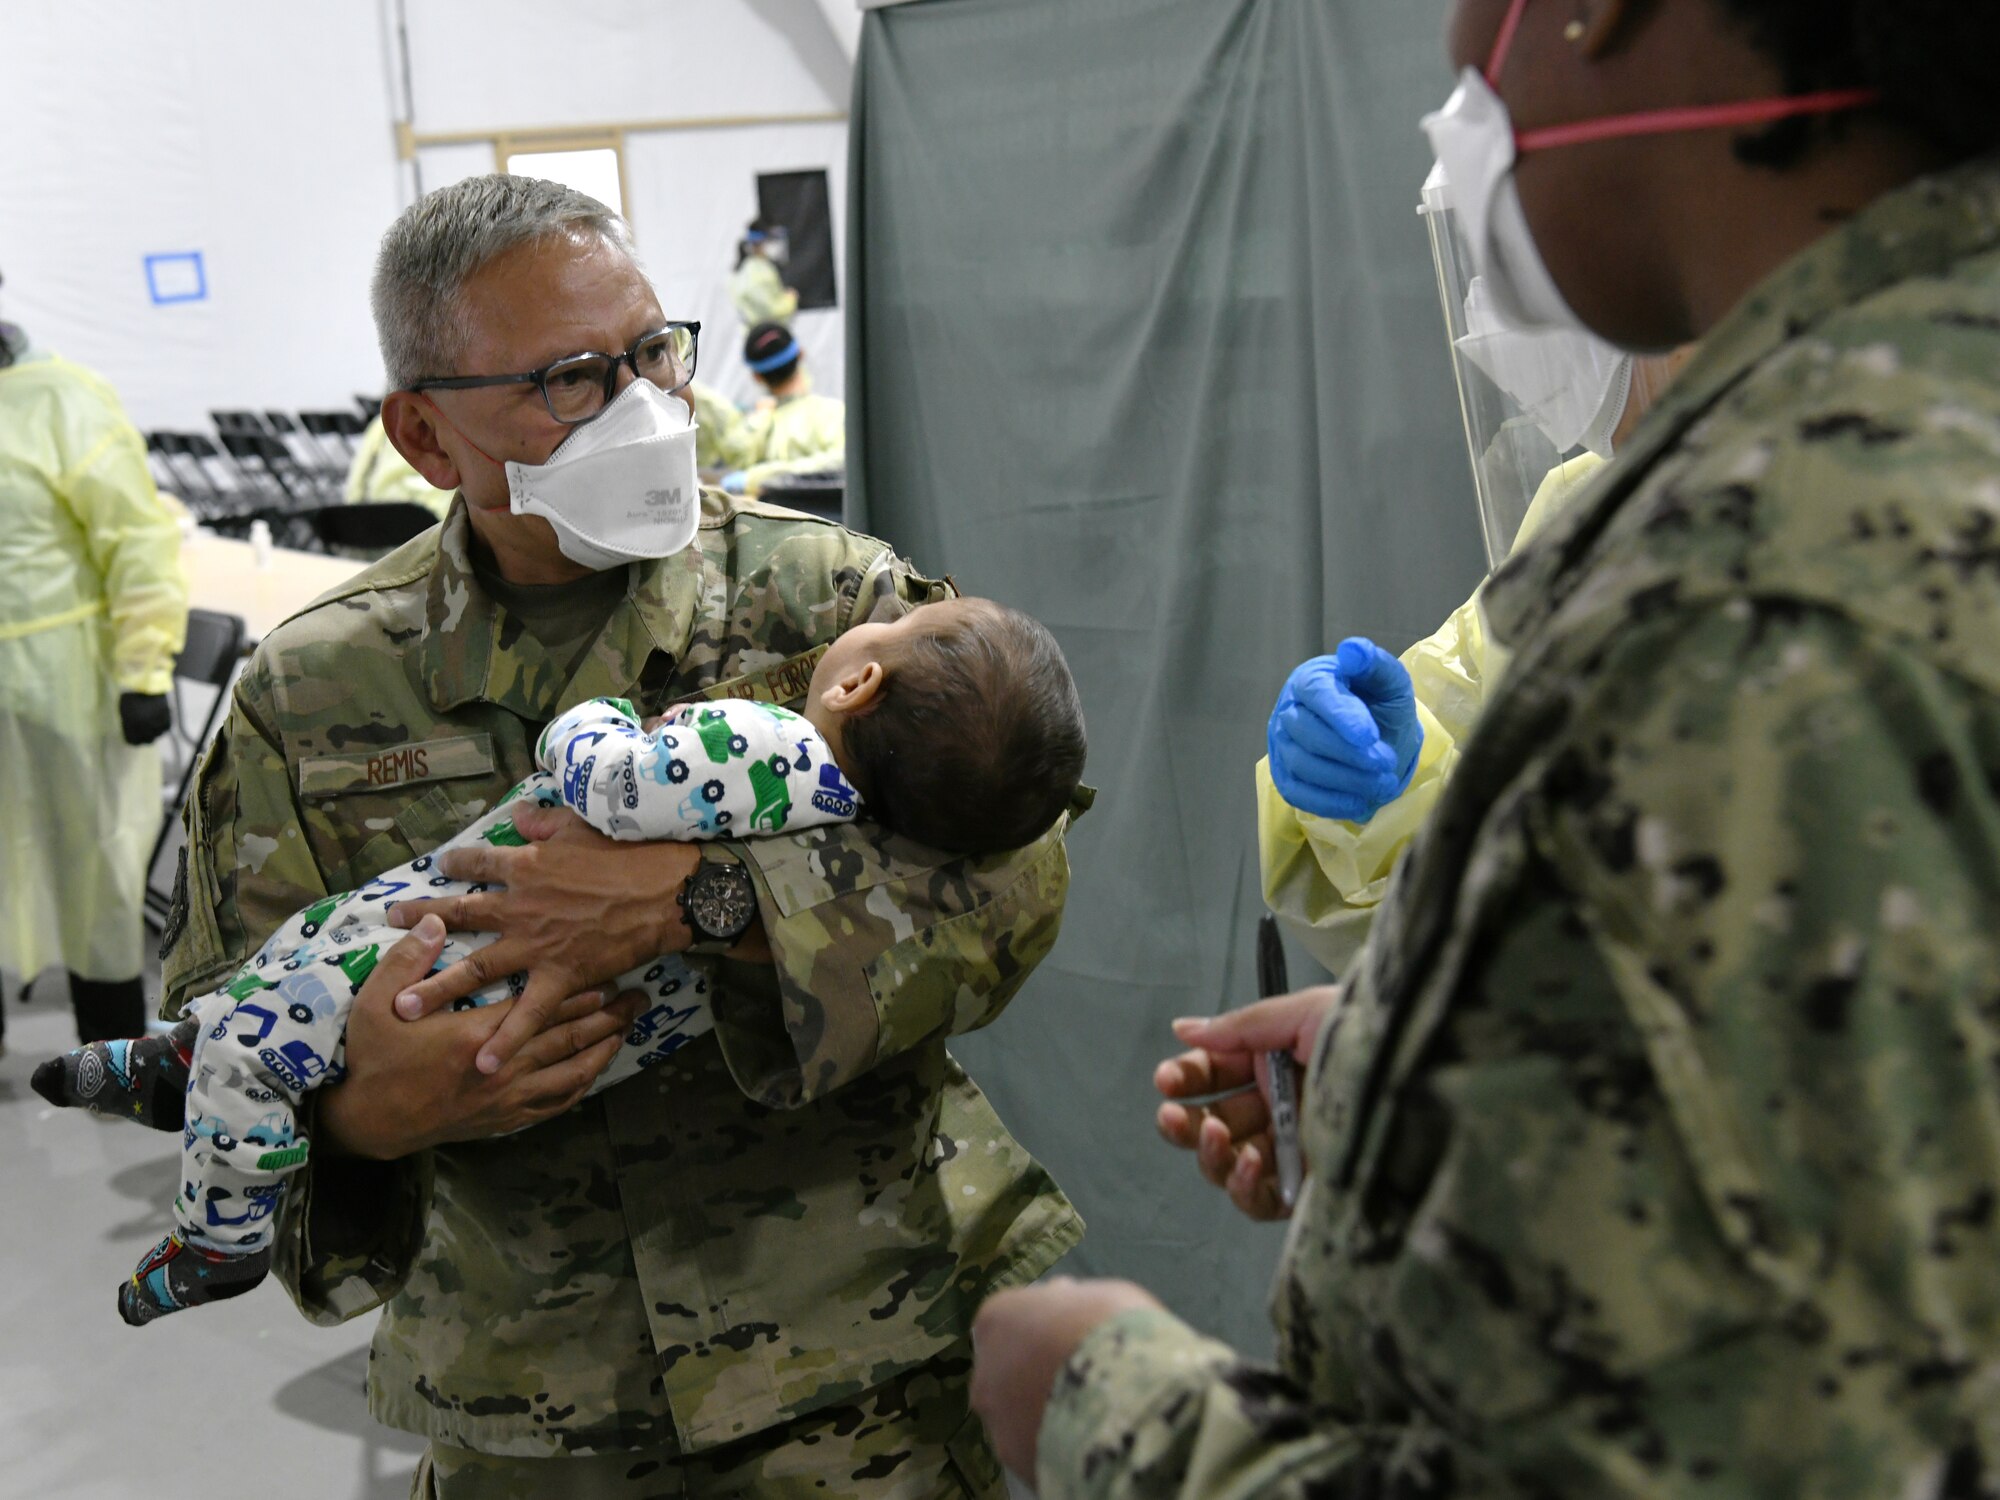 Image of an Airman holding a baby.